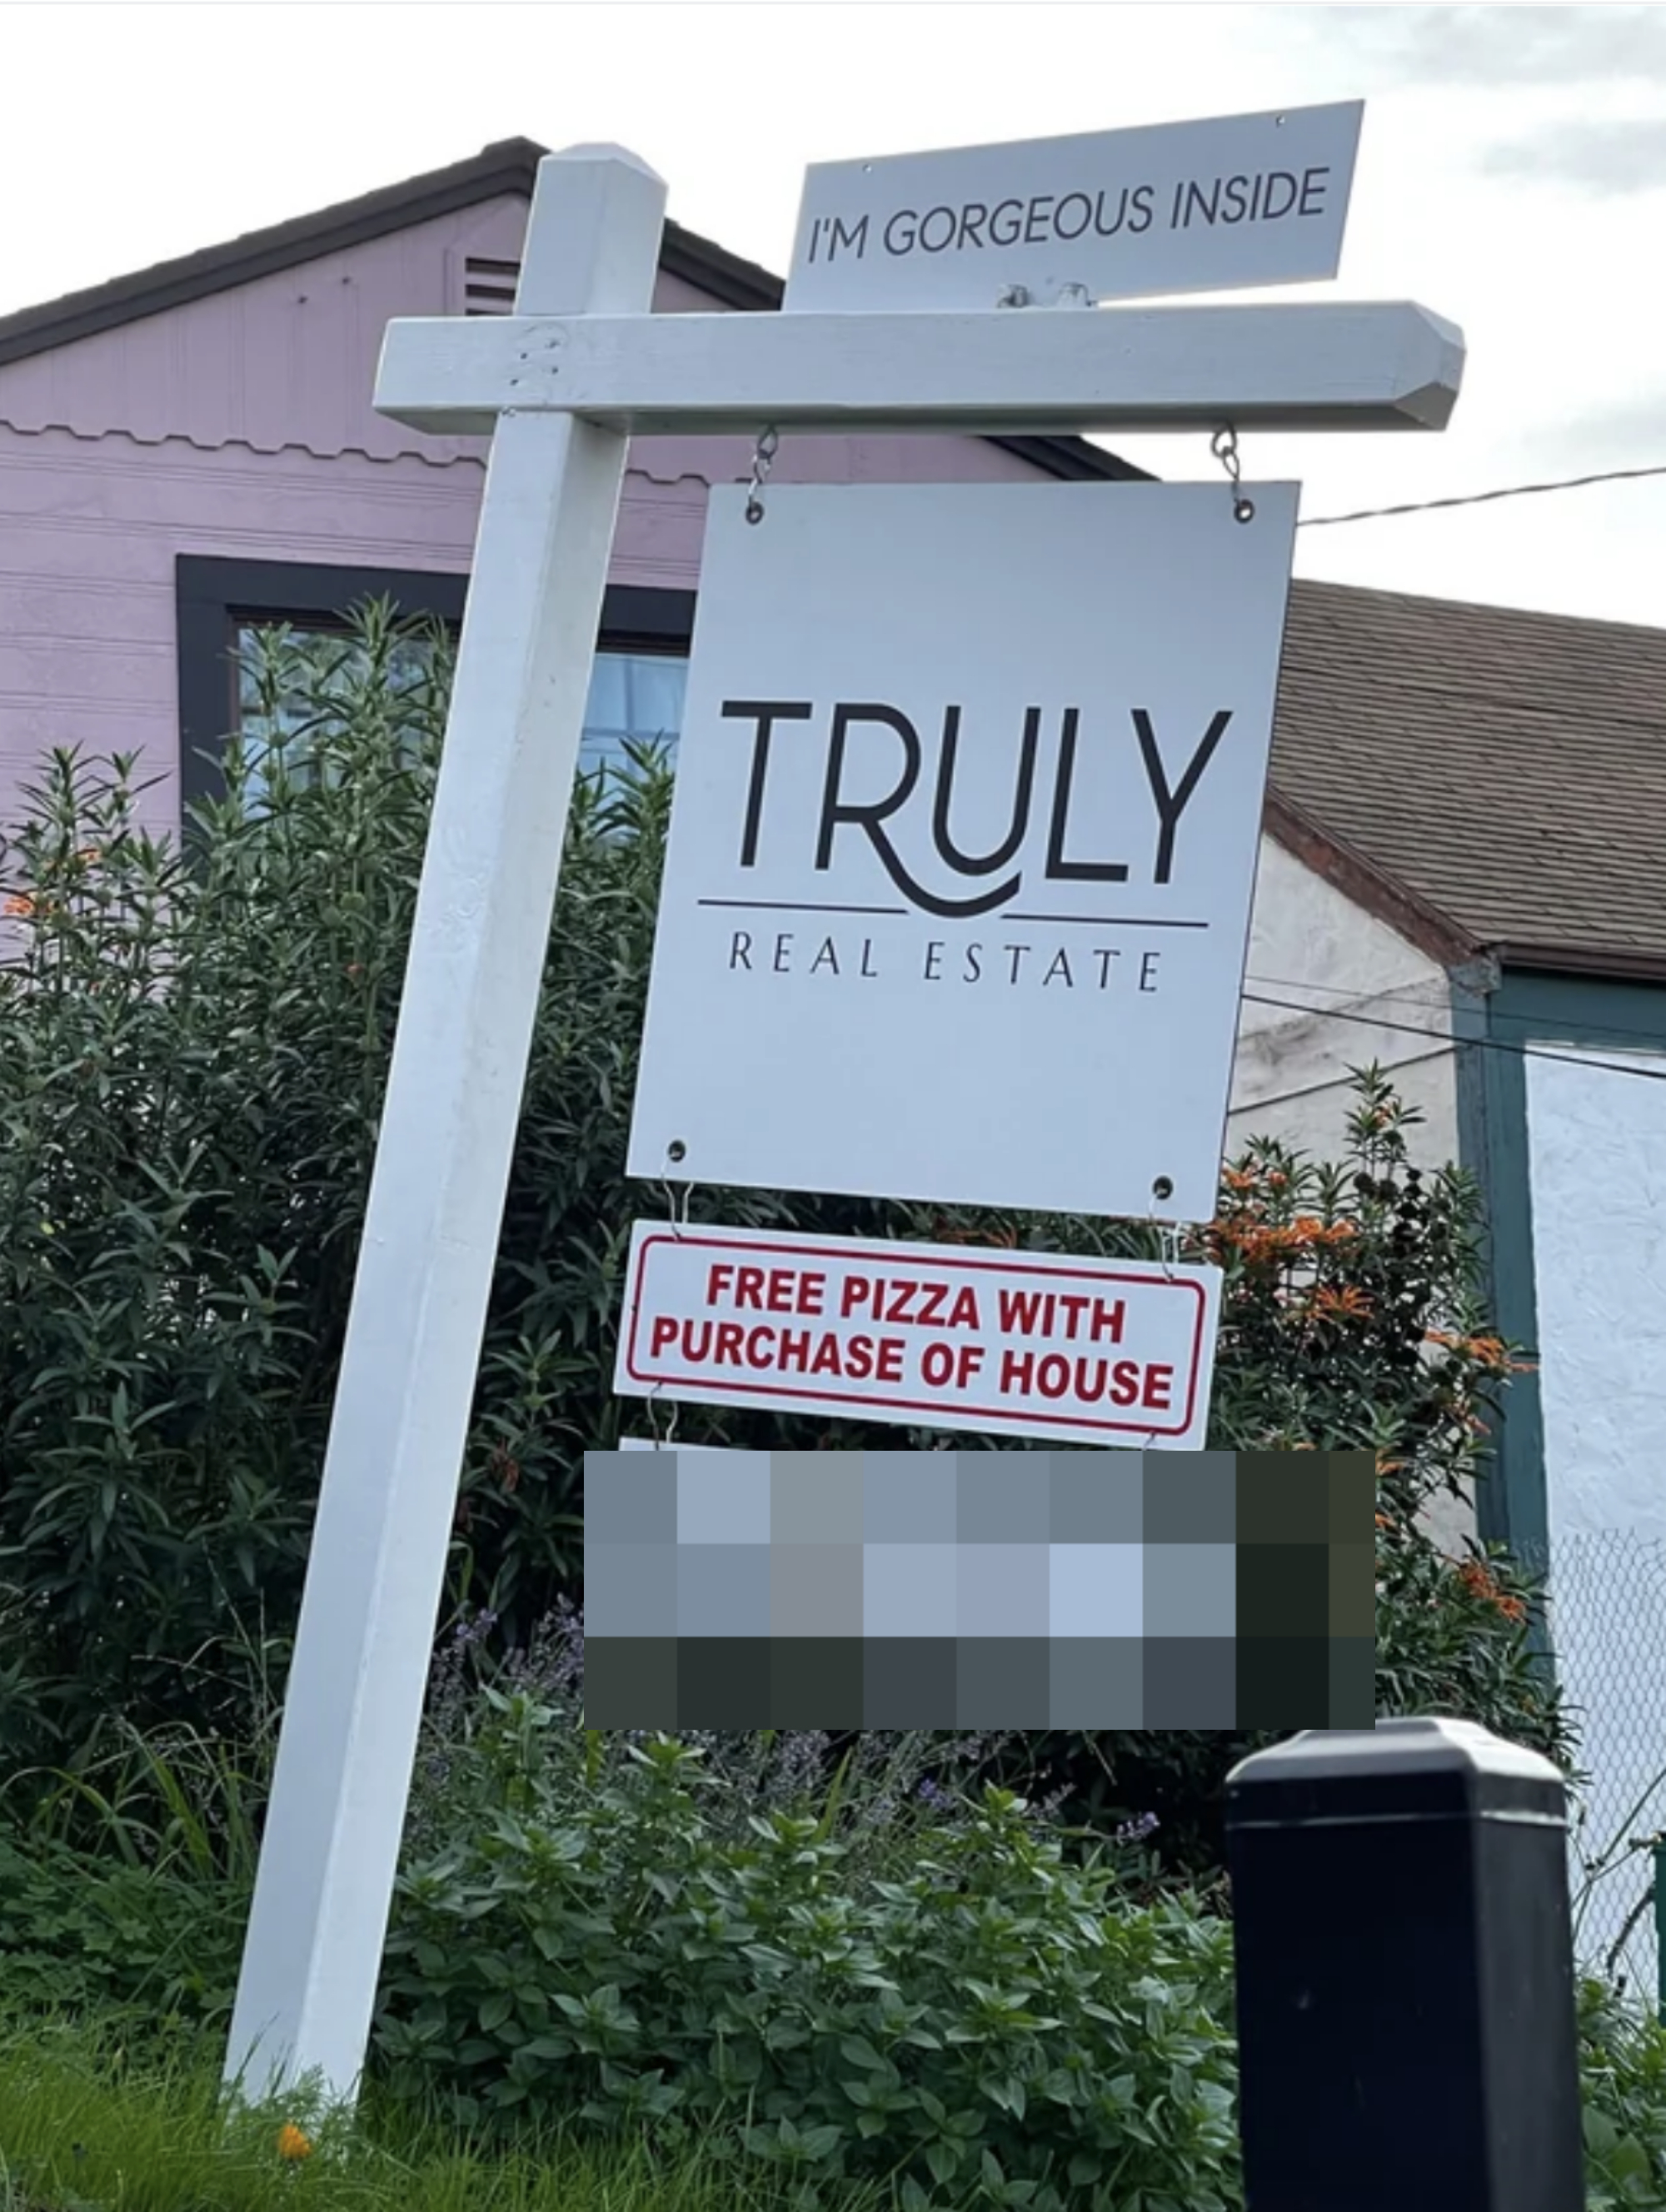 &quot;Free pizza with purchase of house&quot;